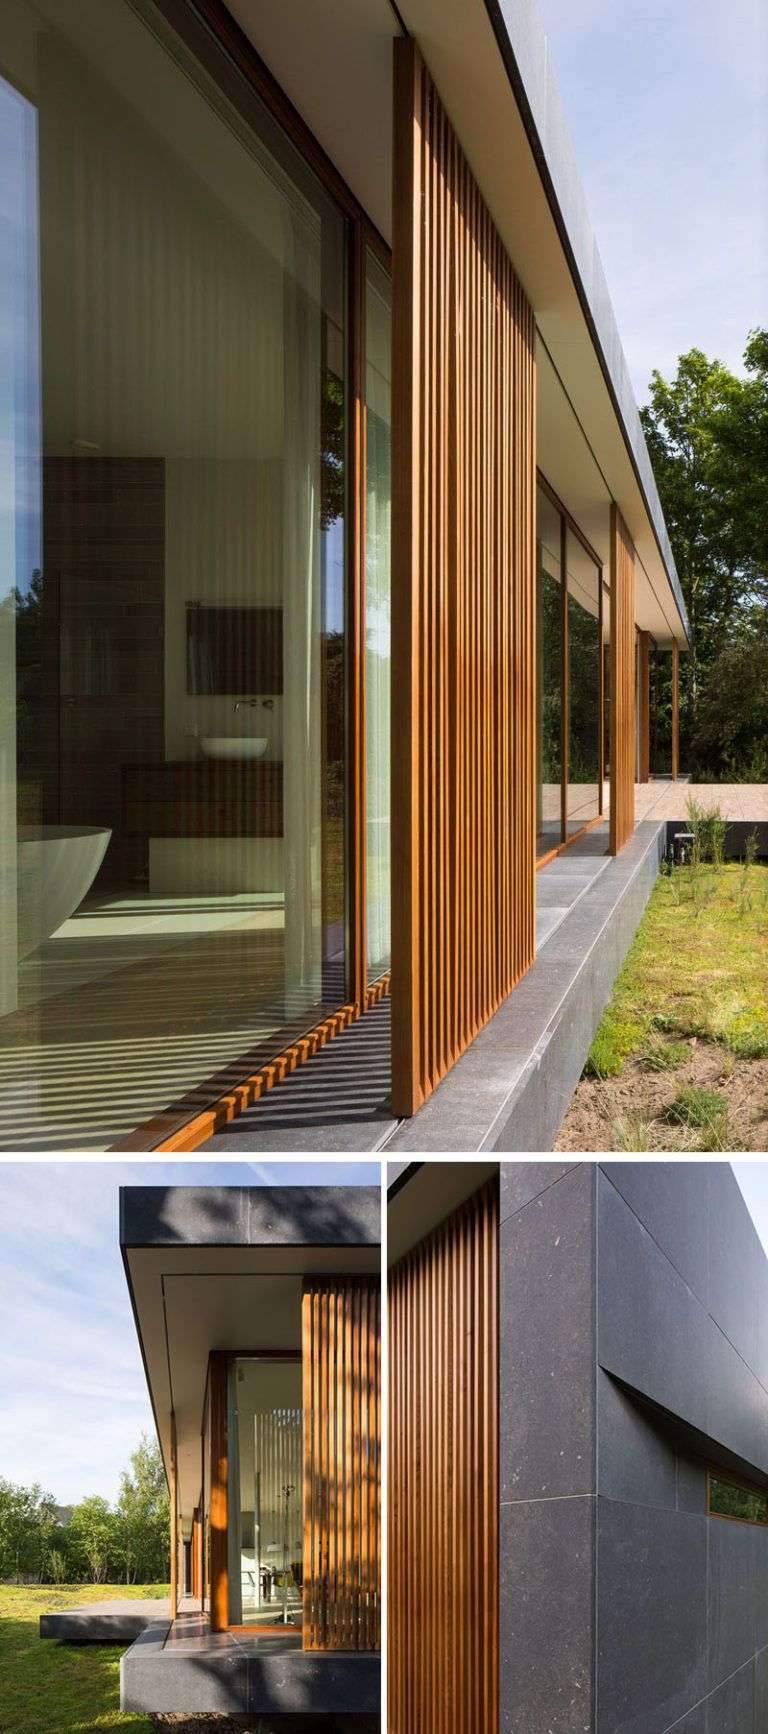 On the facade of this modern home, large scale, sliding wood mullions made from…